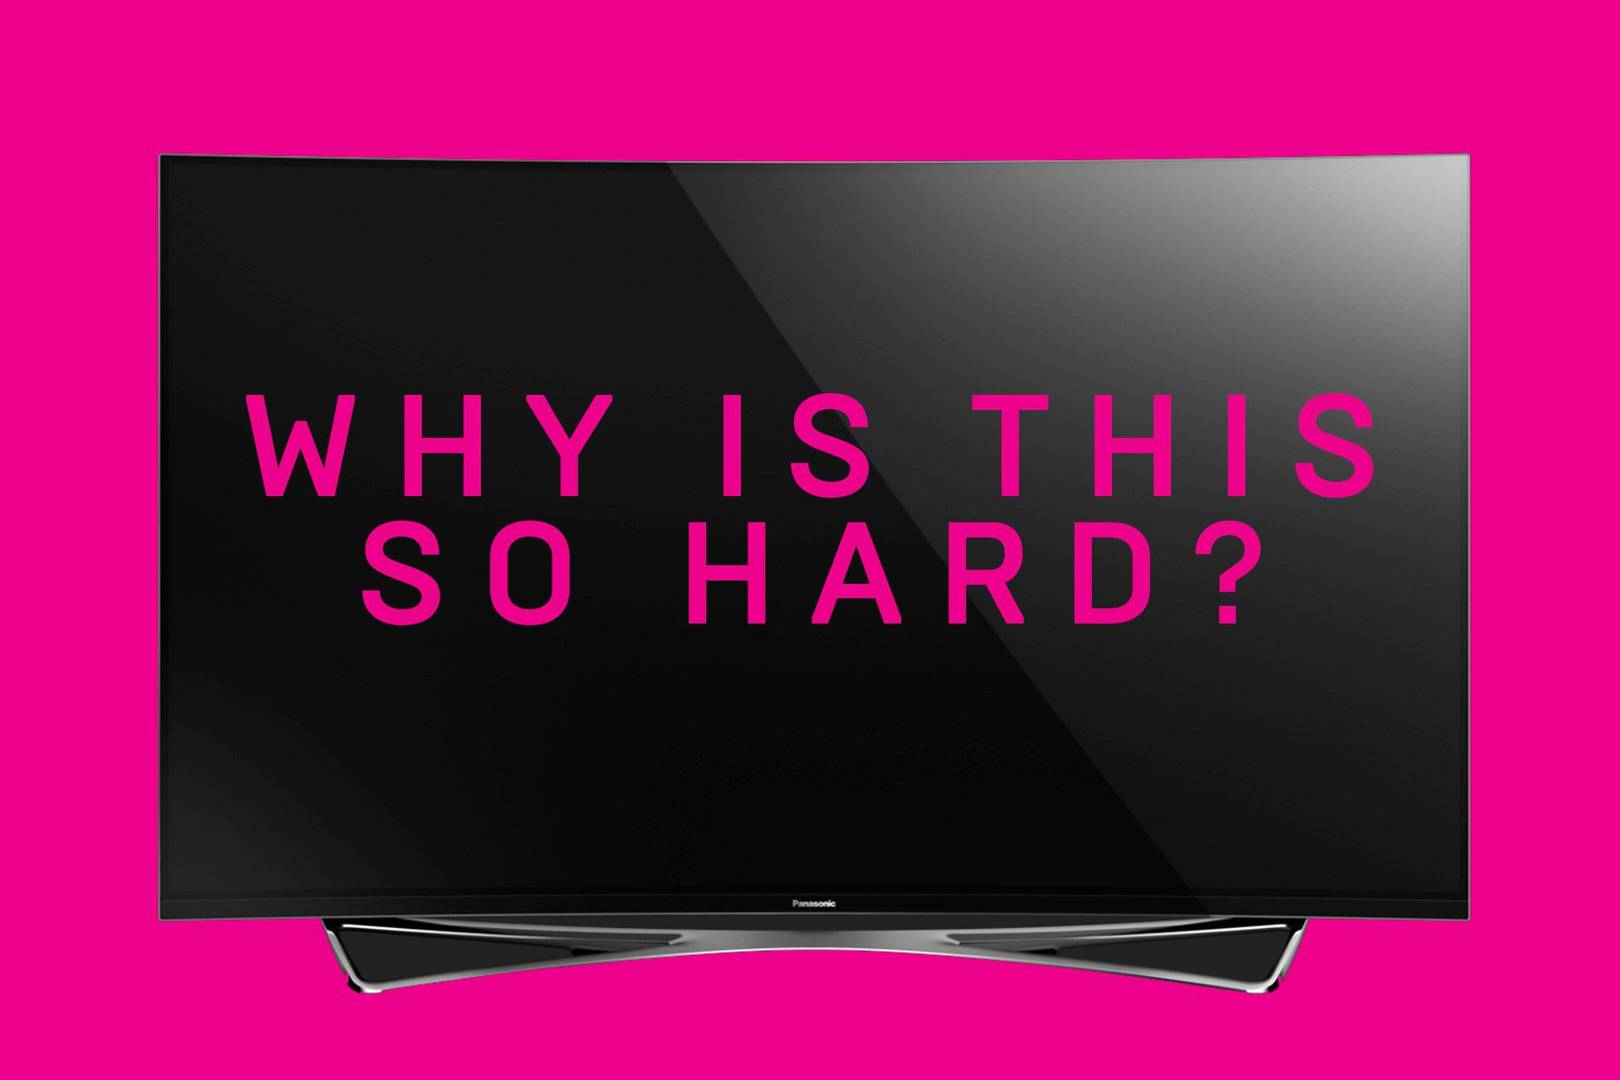 4K or UHD? OLED or QLED? WIRED explains the differences in TV tech